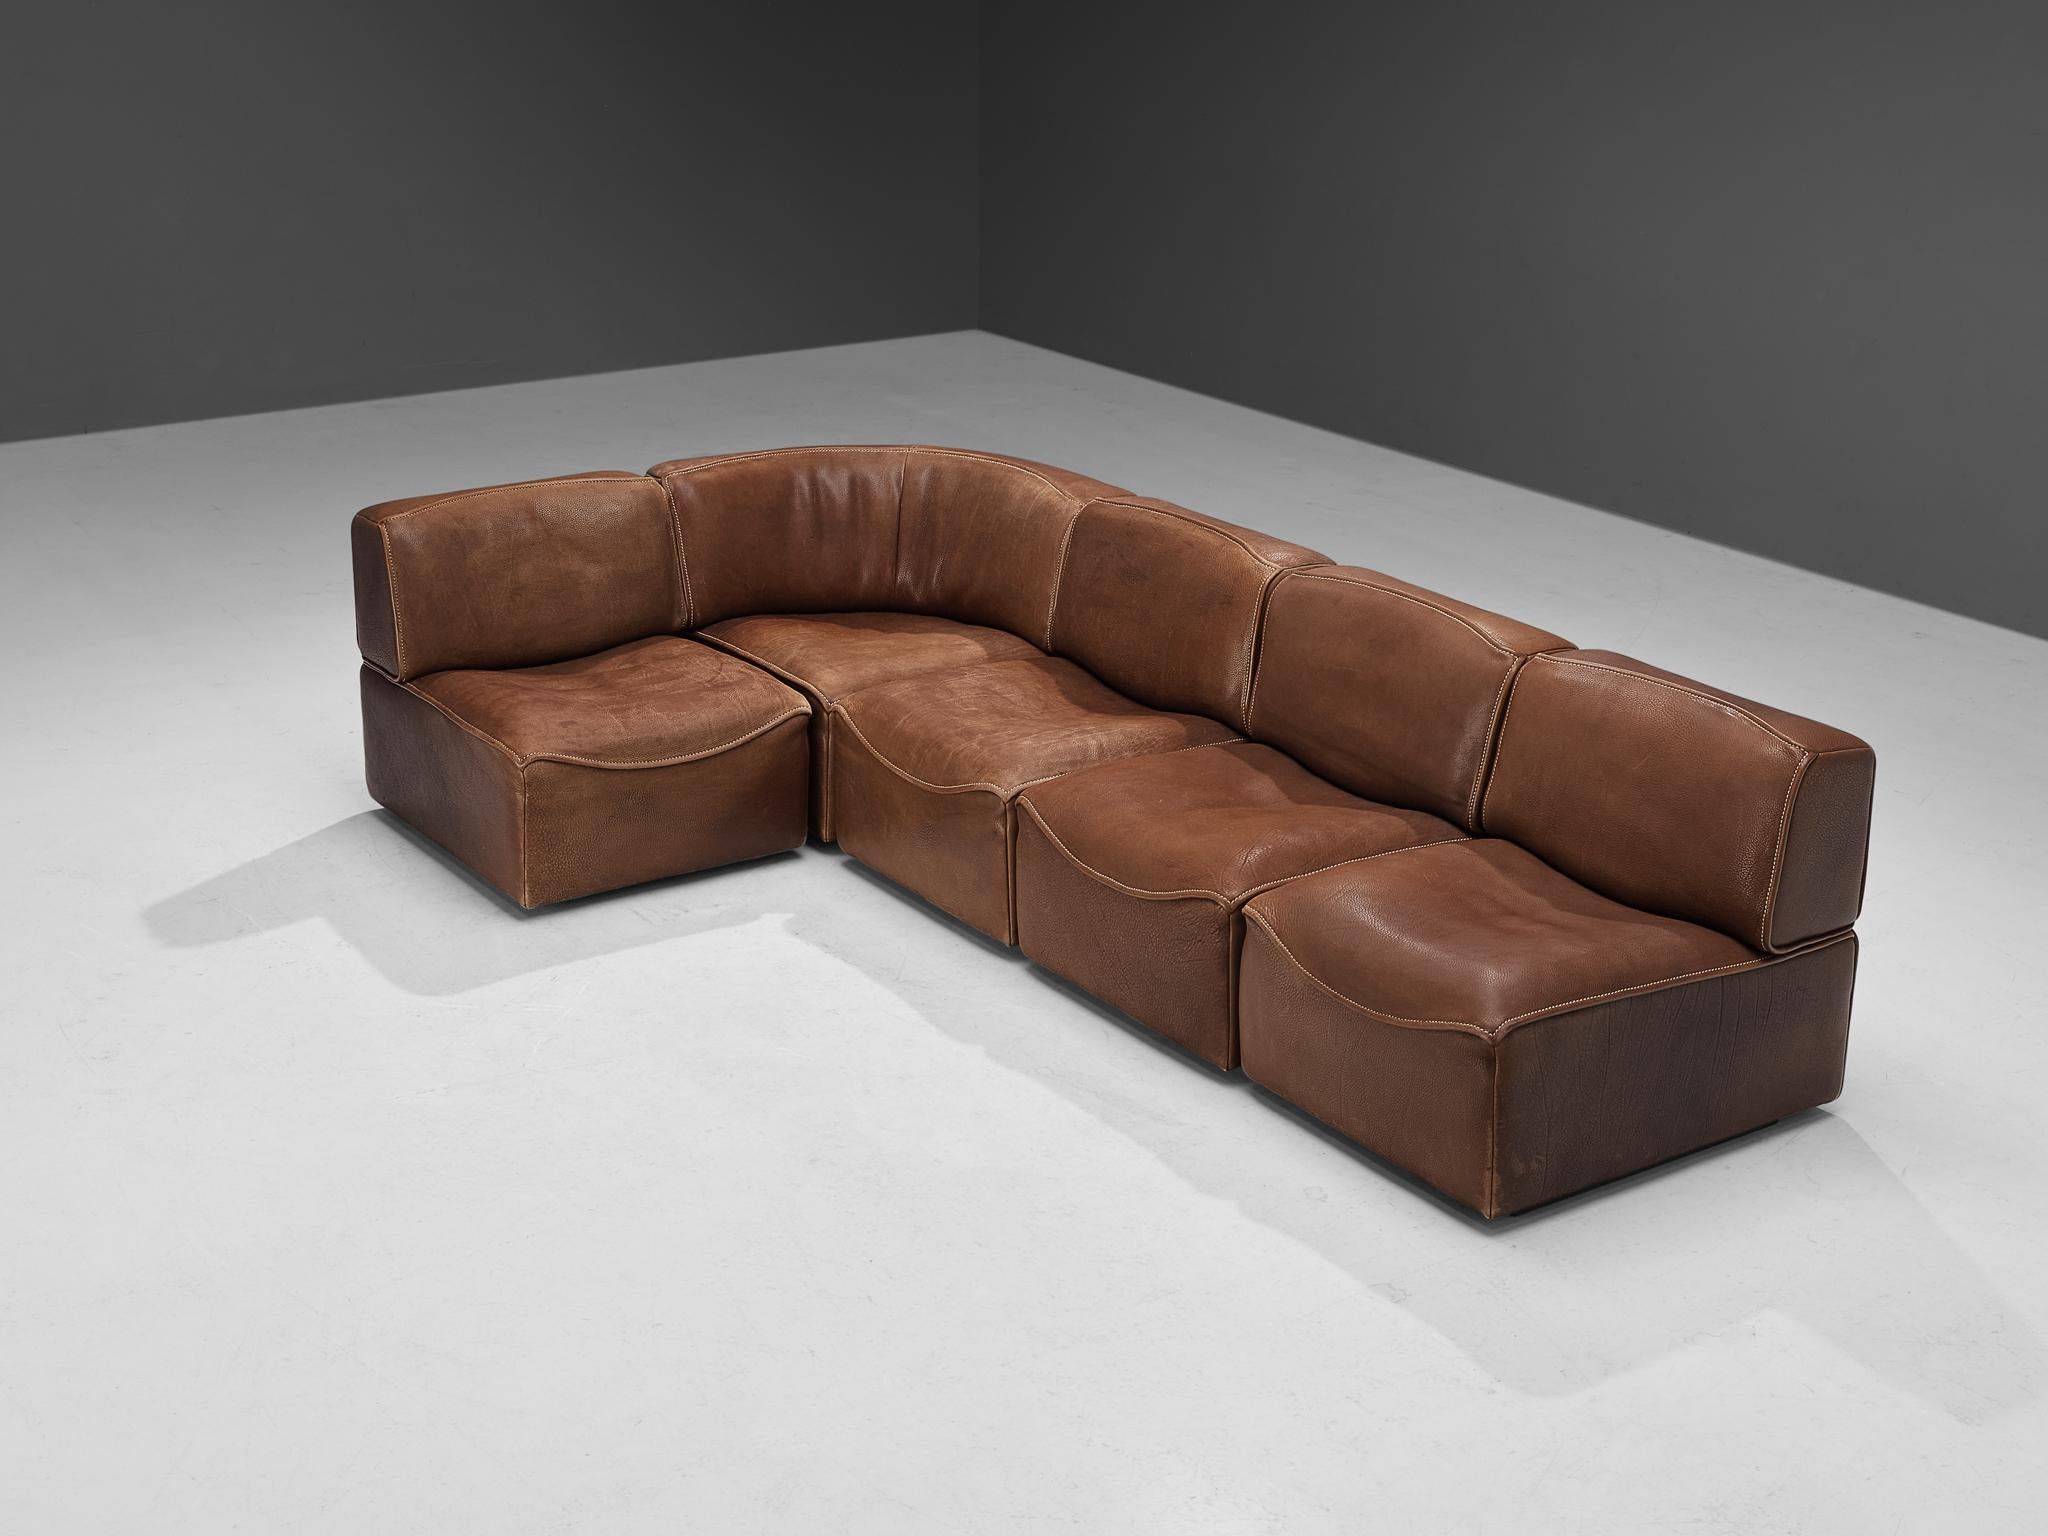 De Sede, sectional sofa model 'DS-15', patinated leather, Switzerland, 1970s.

This high quality sectional sofa designed by De Sede in the 1970s and contains four regular elements and one corner element, which makes it possible to arrange this sofa